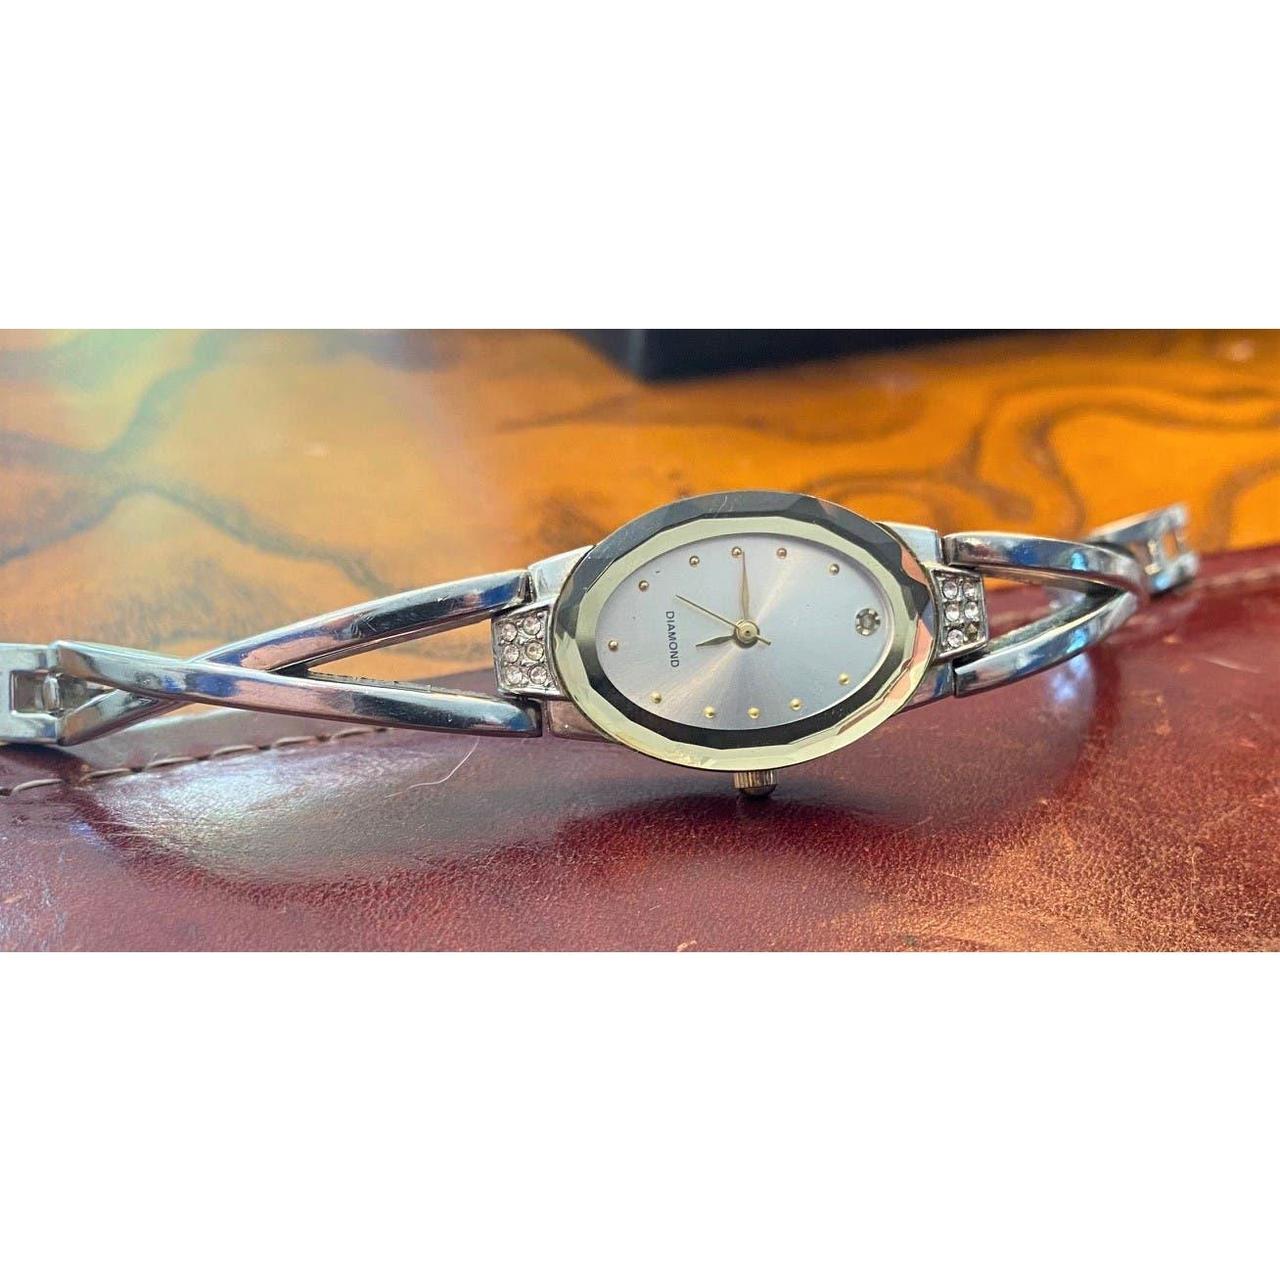 Watches For Women for sale in Greenville, South Carolina | Facebook  Marketplace | Facebook